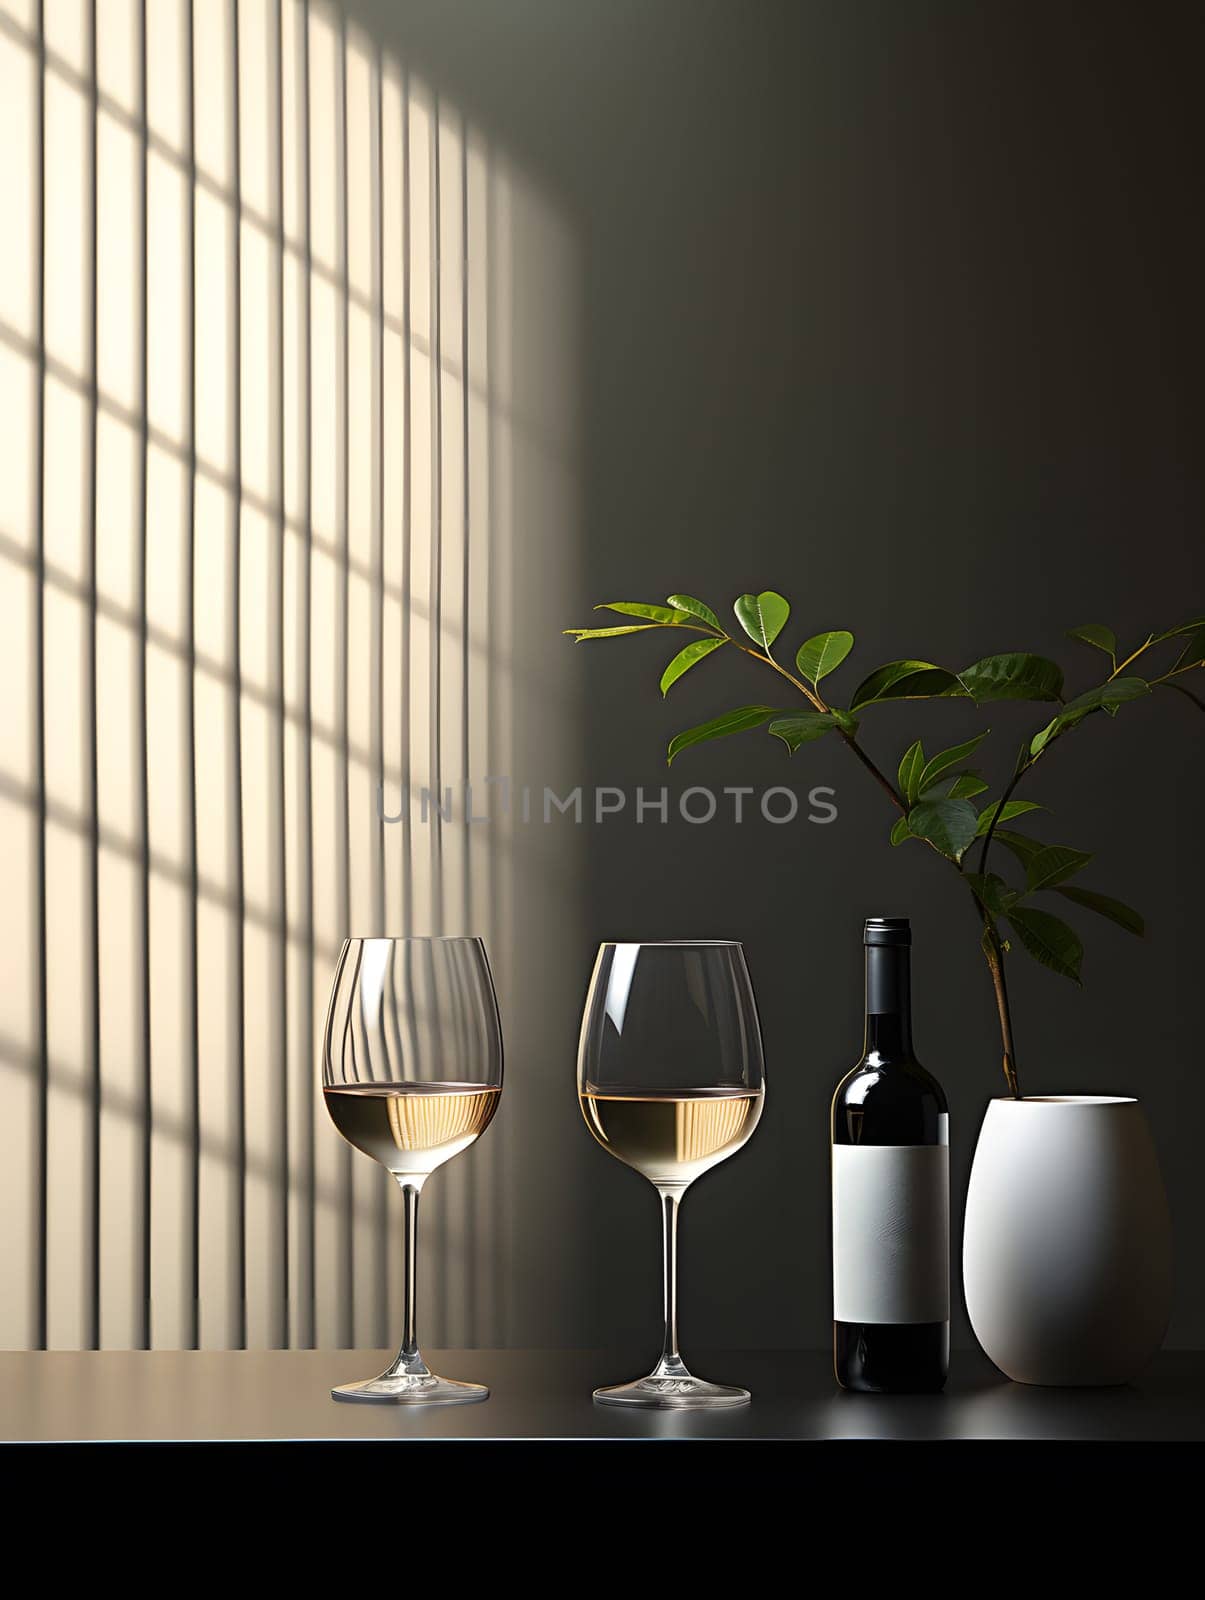 Two elegant wine glasses and a bottle of fine wine displayed on a wooden table. Perfect for a romantic evening or casual gathering